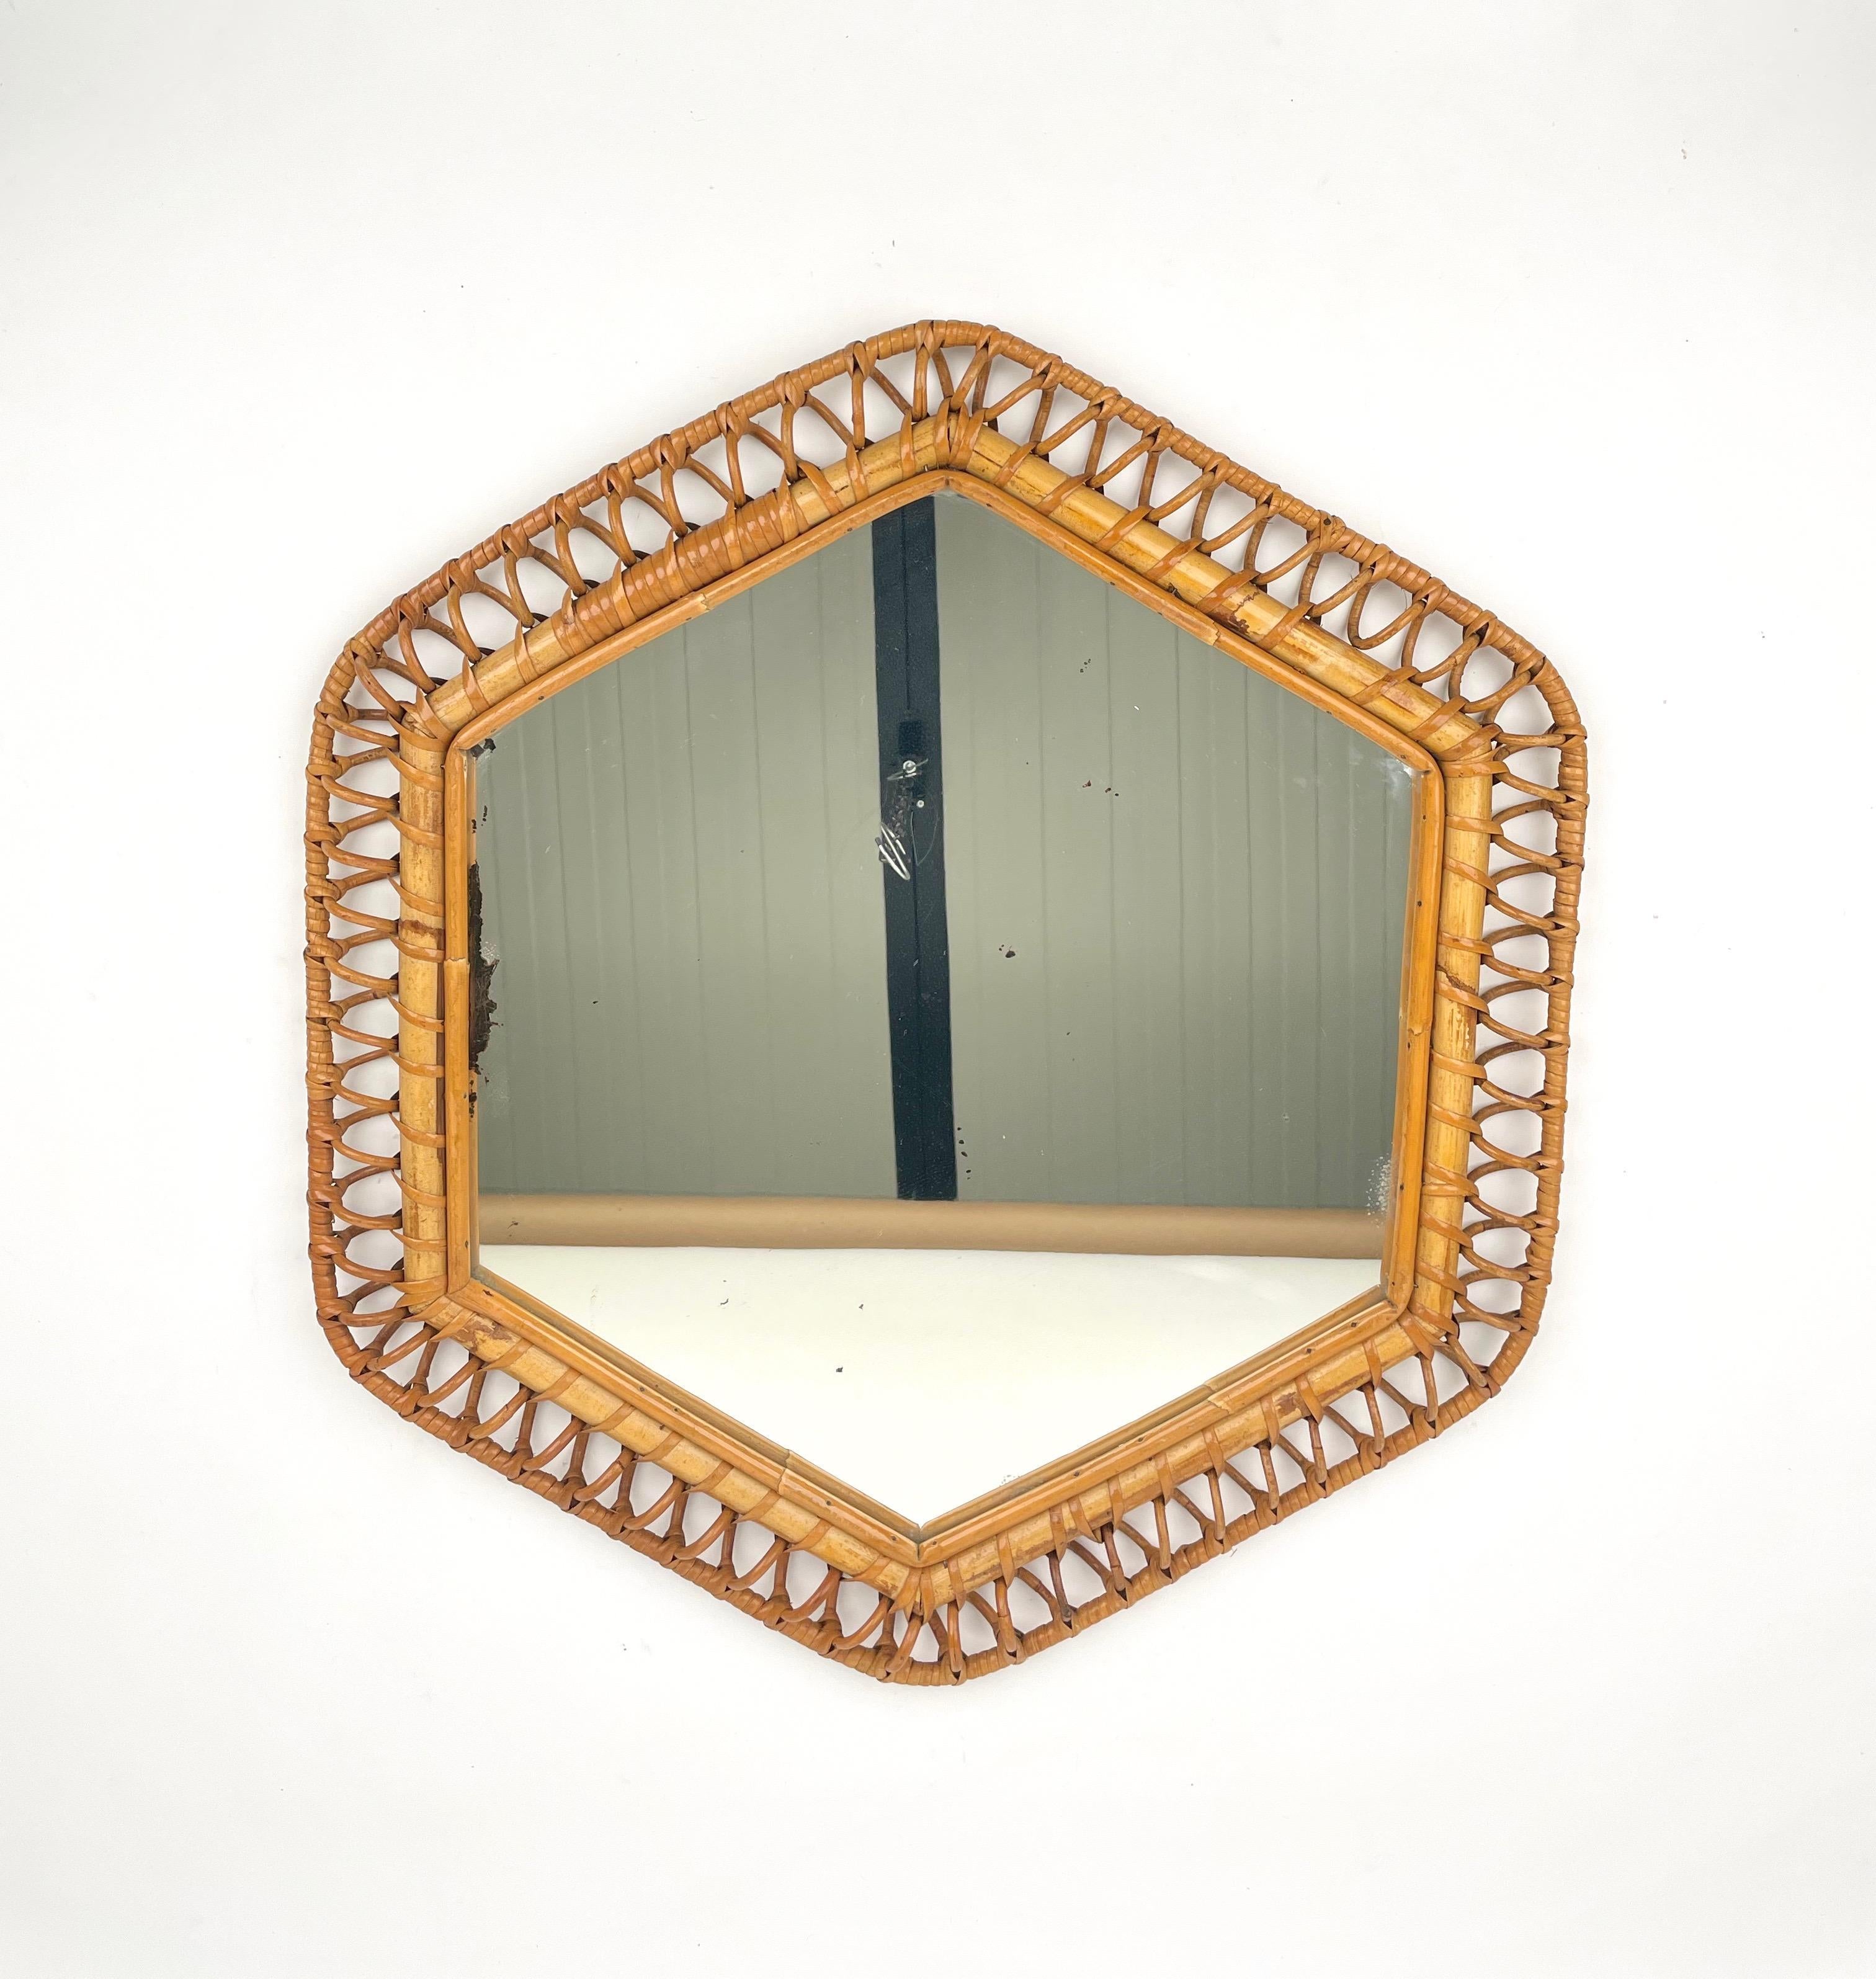 Hexagonal wall mirror featuring bamboo frame surrounded by elegant wicker spirals.

Made in Italy in the 1960s.